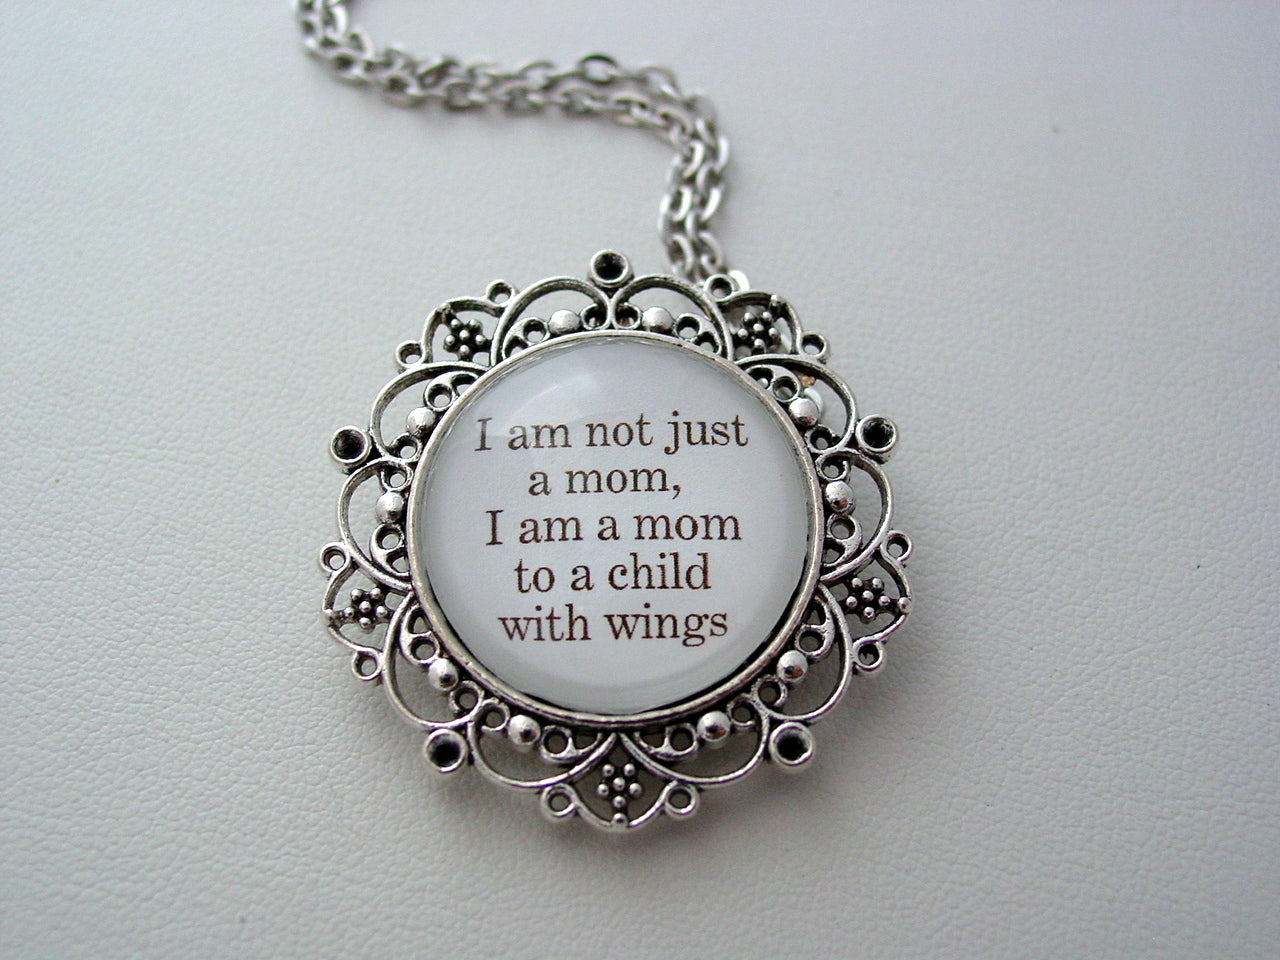 Memorial Jewelry I Am Not Just A Mom, I Am A Mom To A Child With Wings Inspiring Quote Your Choice Keychain or Necklace